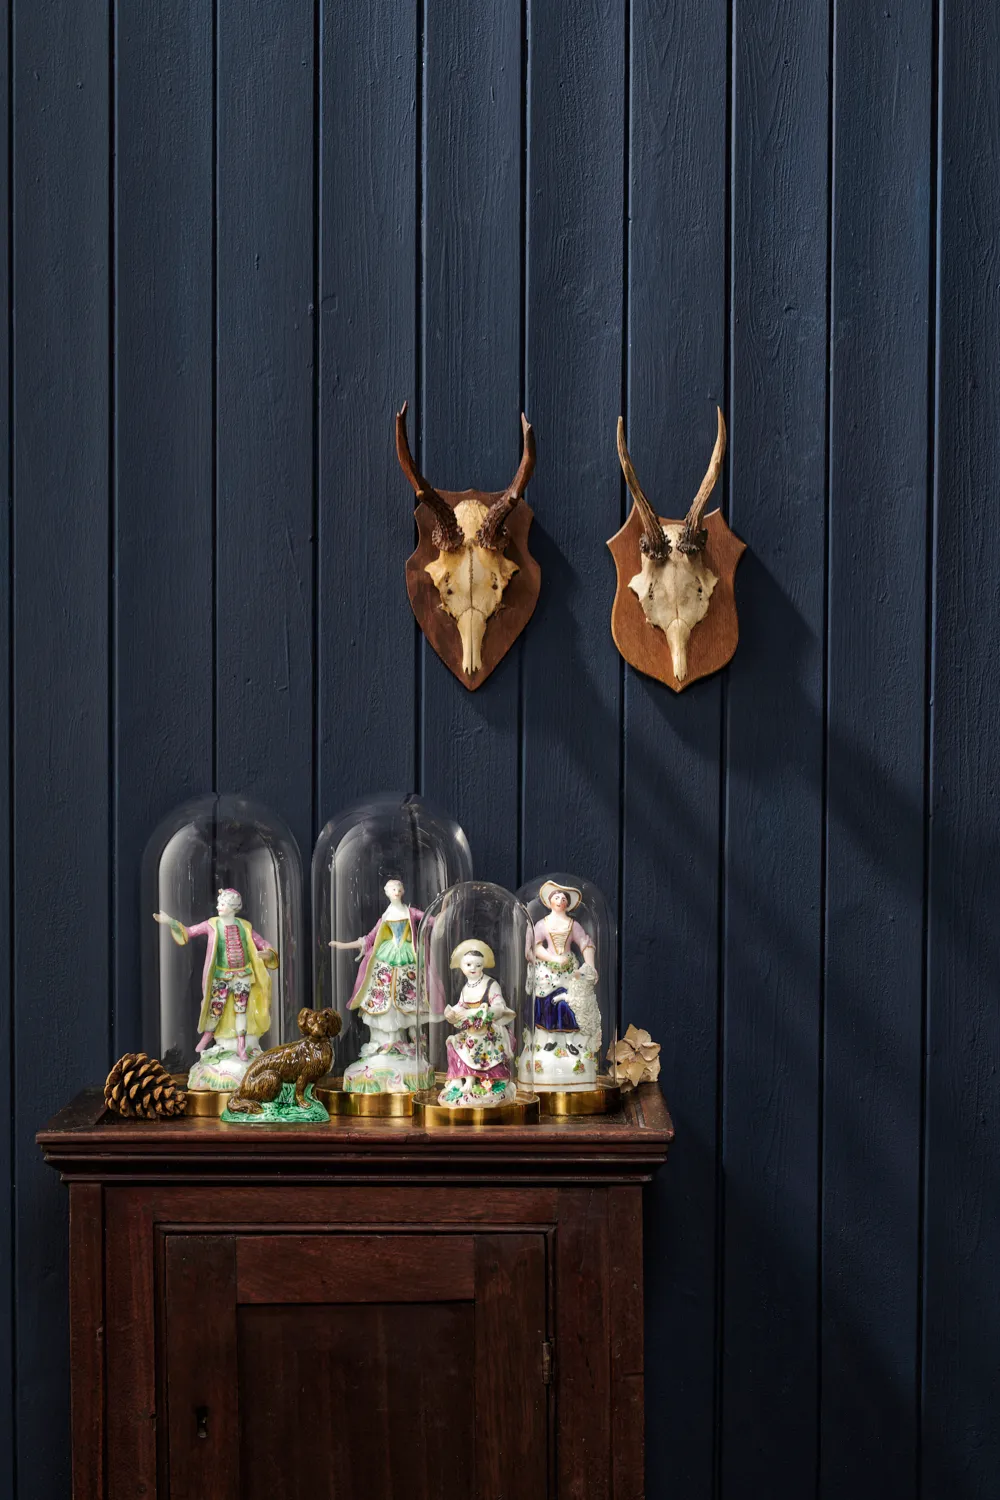 Figurines displayed in glass domes against a Farrow & Ball painted wall and antique mounted antlers